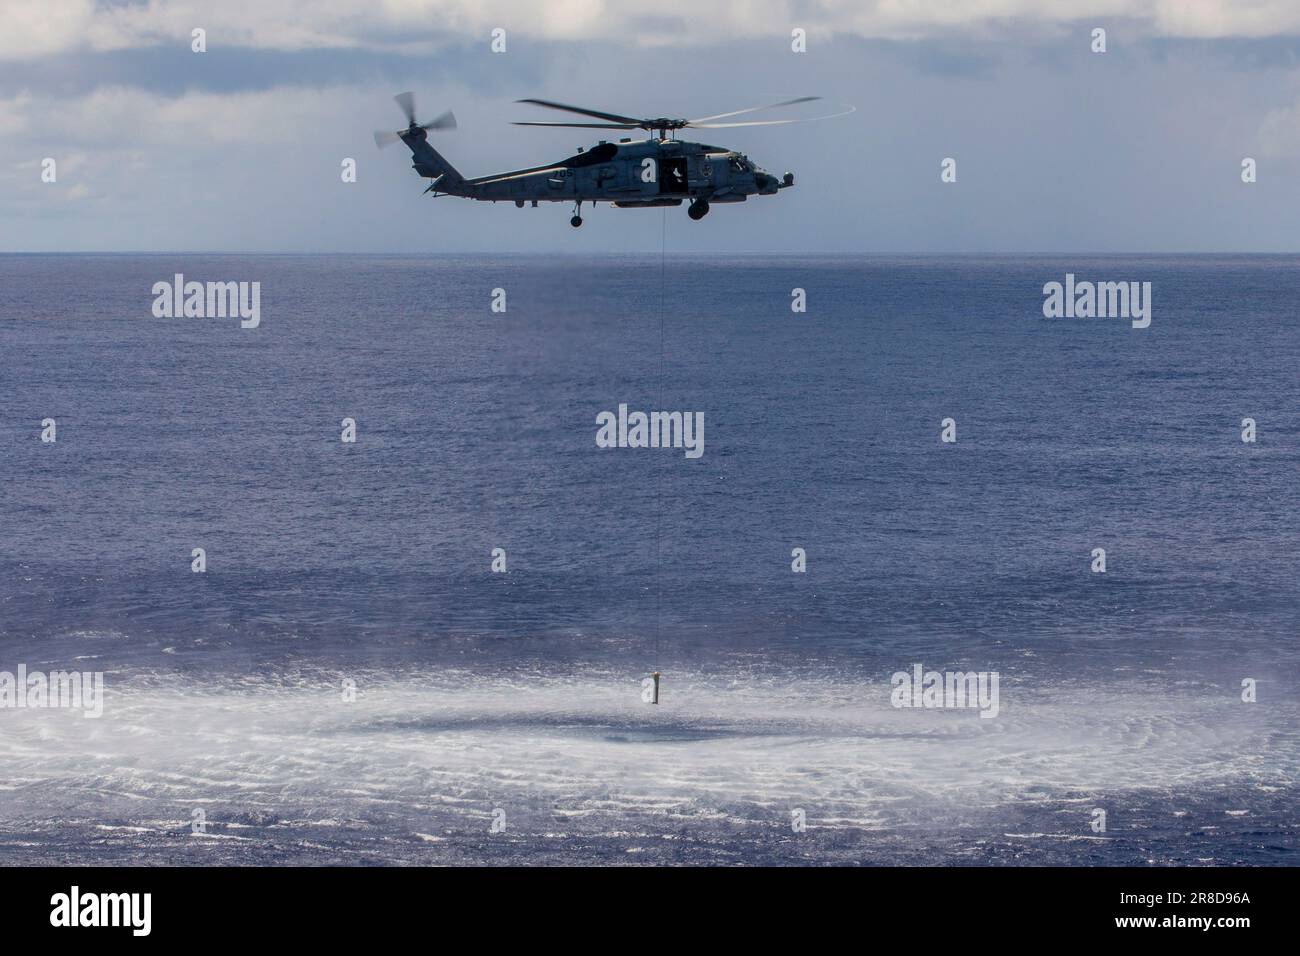 230618-N-PA221-1230 PACIFIC OCEAN (June 18, 2023) An MH-60R Sea Hawk helicopter from the 'Battlecats' of Helicopter Maritime Strike Squadron (HSM) 73 lowers an airborne low-frequency sonar (ALFS) into the water near the aircraft carrier USS Nimitz (CVN 68). Nimitz is underway conducting routine operations. (U.S. Navy photo by Mass Communication Specialist 3rd Class Kevin Tang) Stock Photo